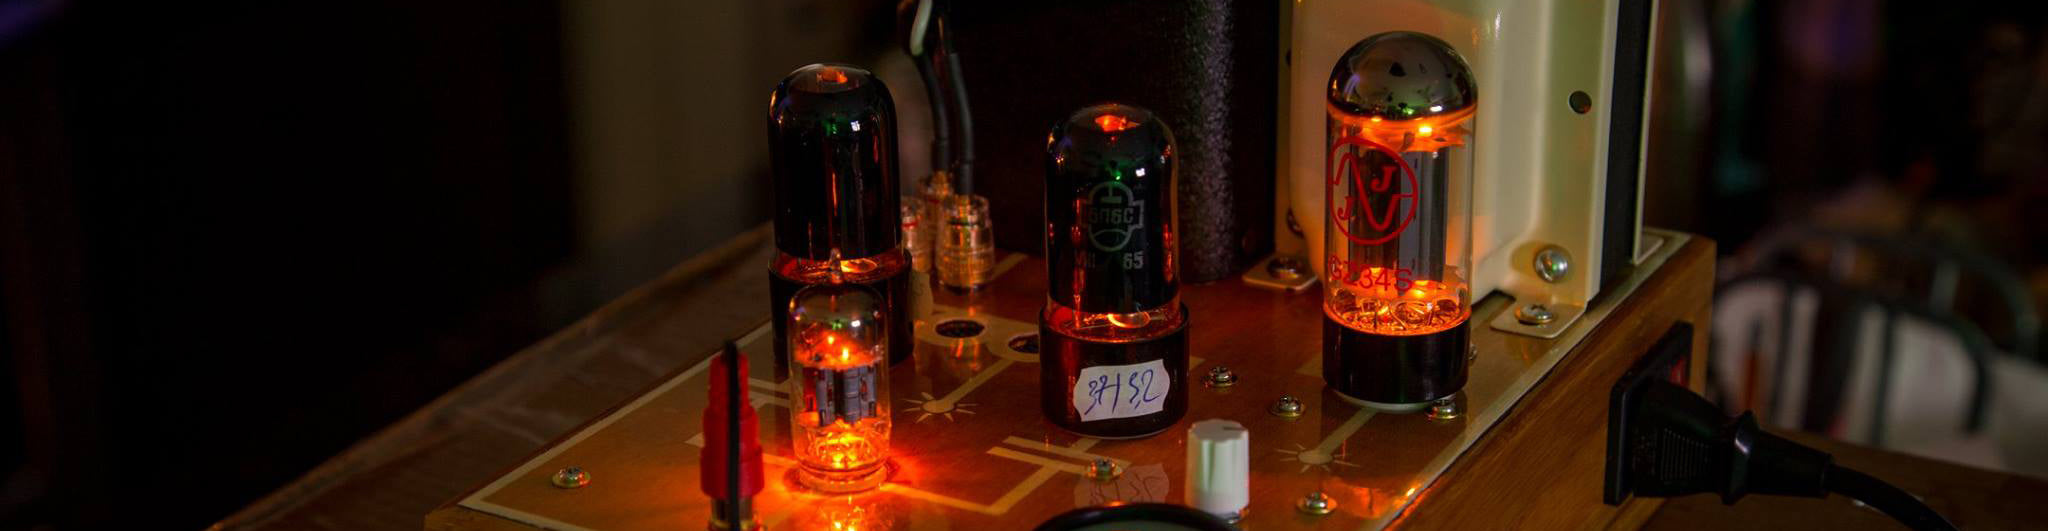 Tube Amplifier Push-Pull Output Transformer